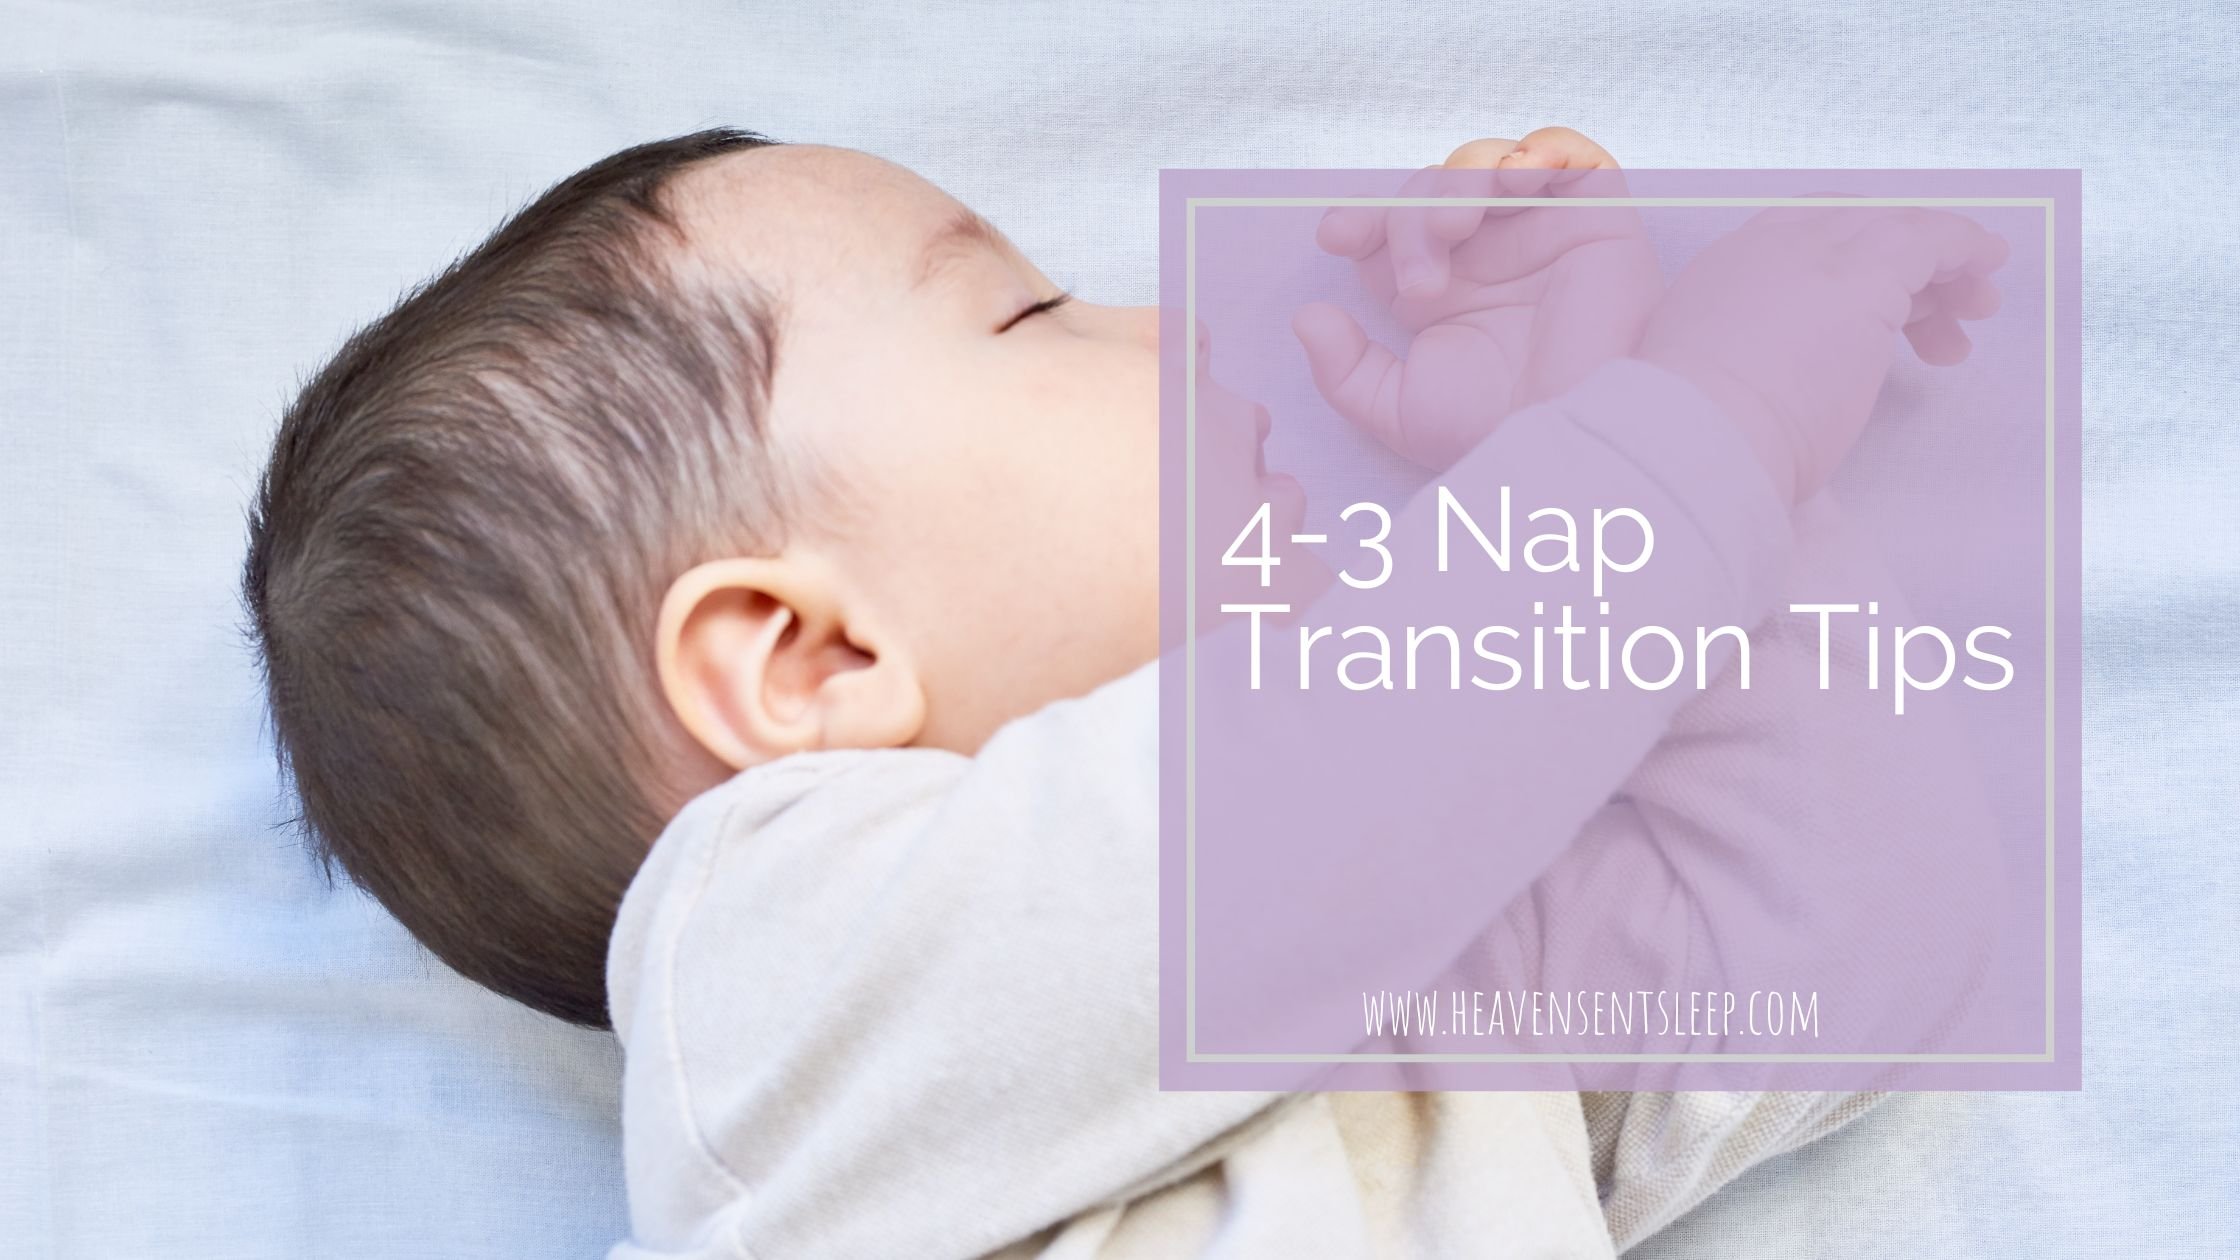 4 to 3 Nap Transition